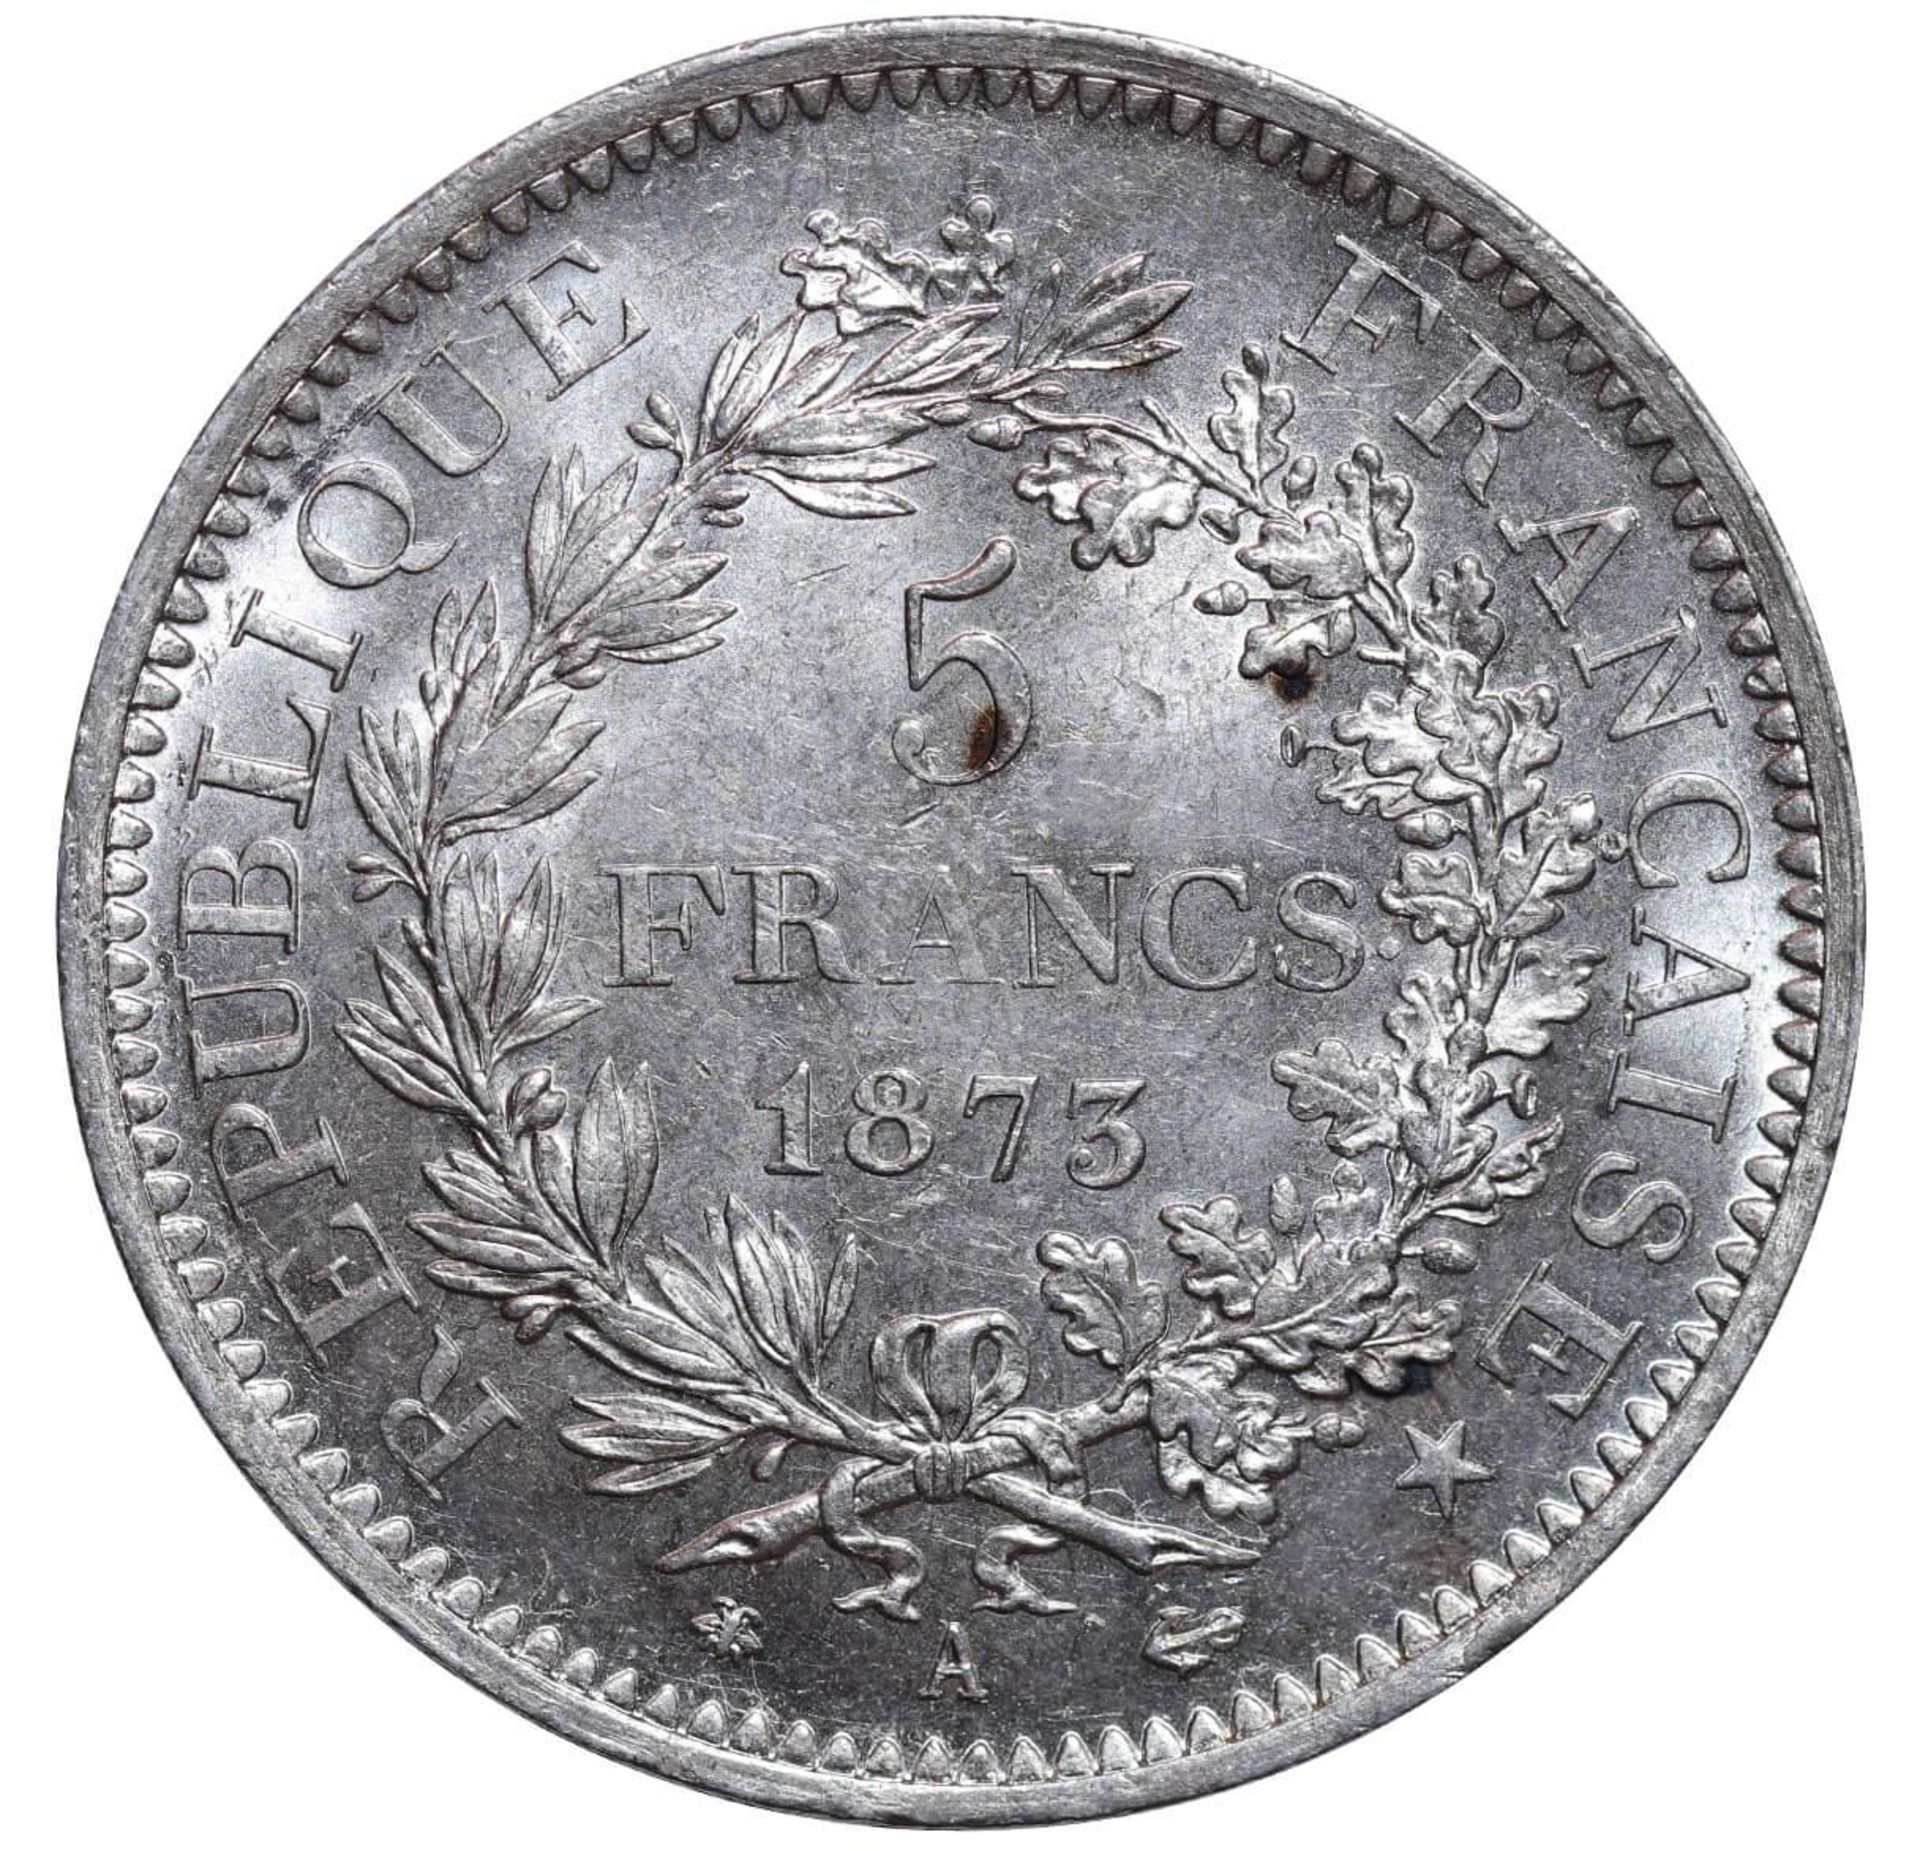 France, 5 Francs, 1873 year, A - Image 2 of 3